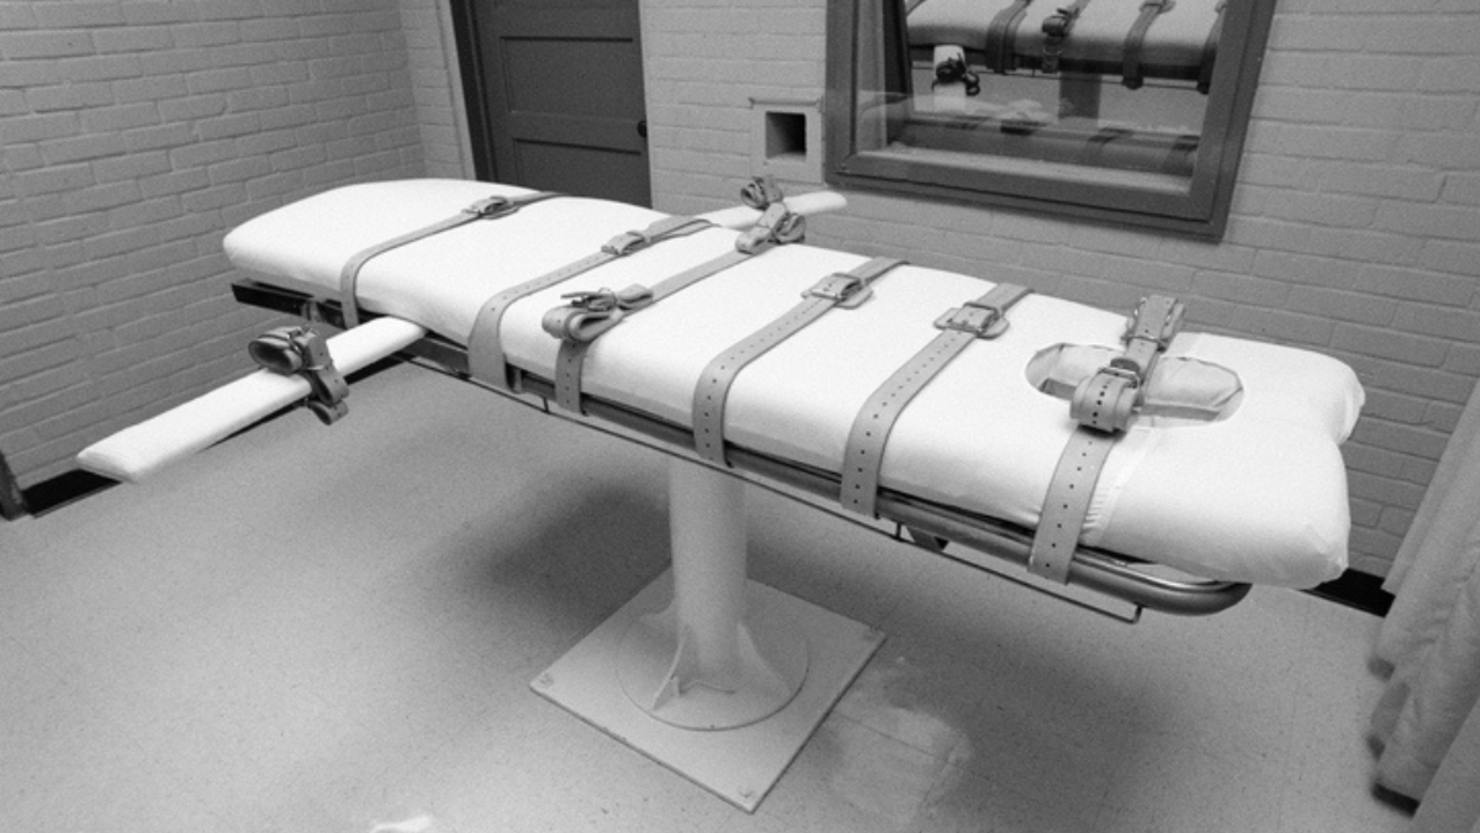 Supreme Court Rejects Black Death Row Inmates Appeal Over Racial Bias